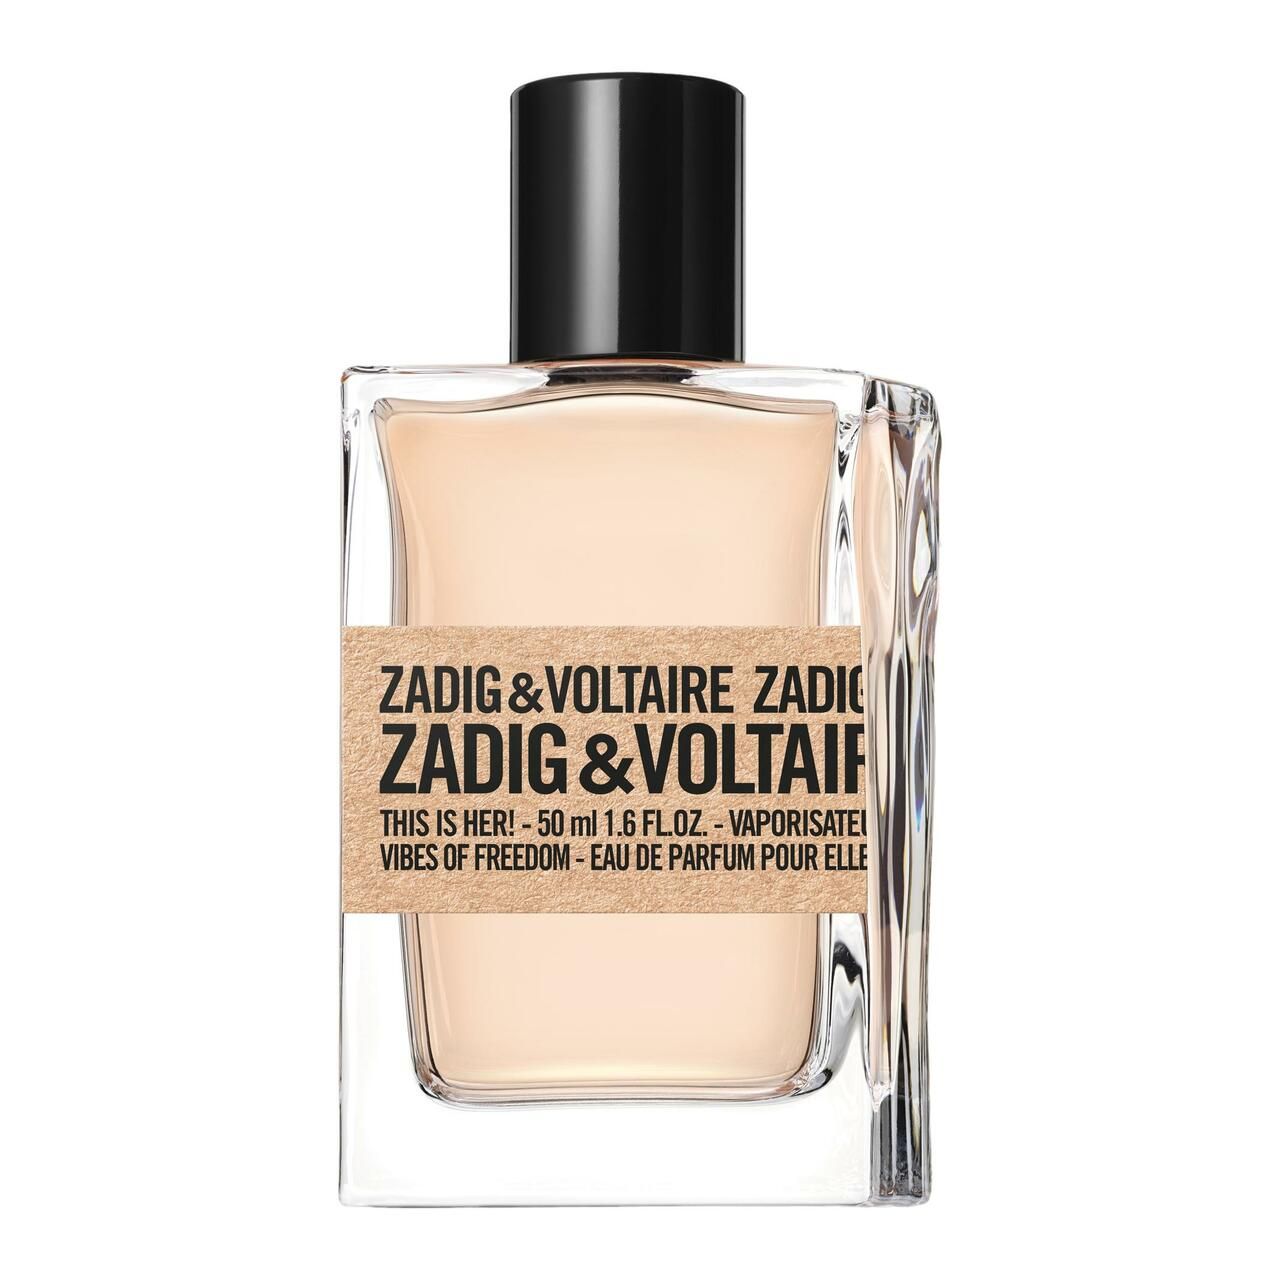 Zadig & Voltaire, This is Her! Vibes of Freedom E.d.P. Nat. Spray